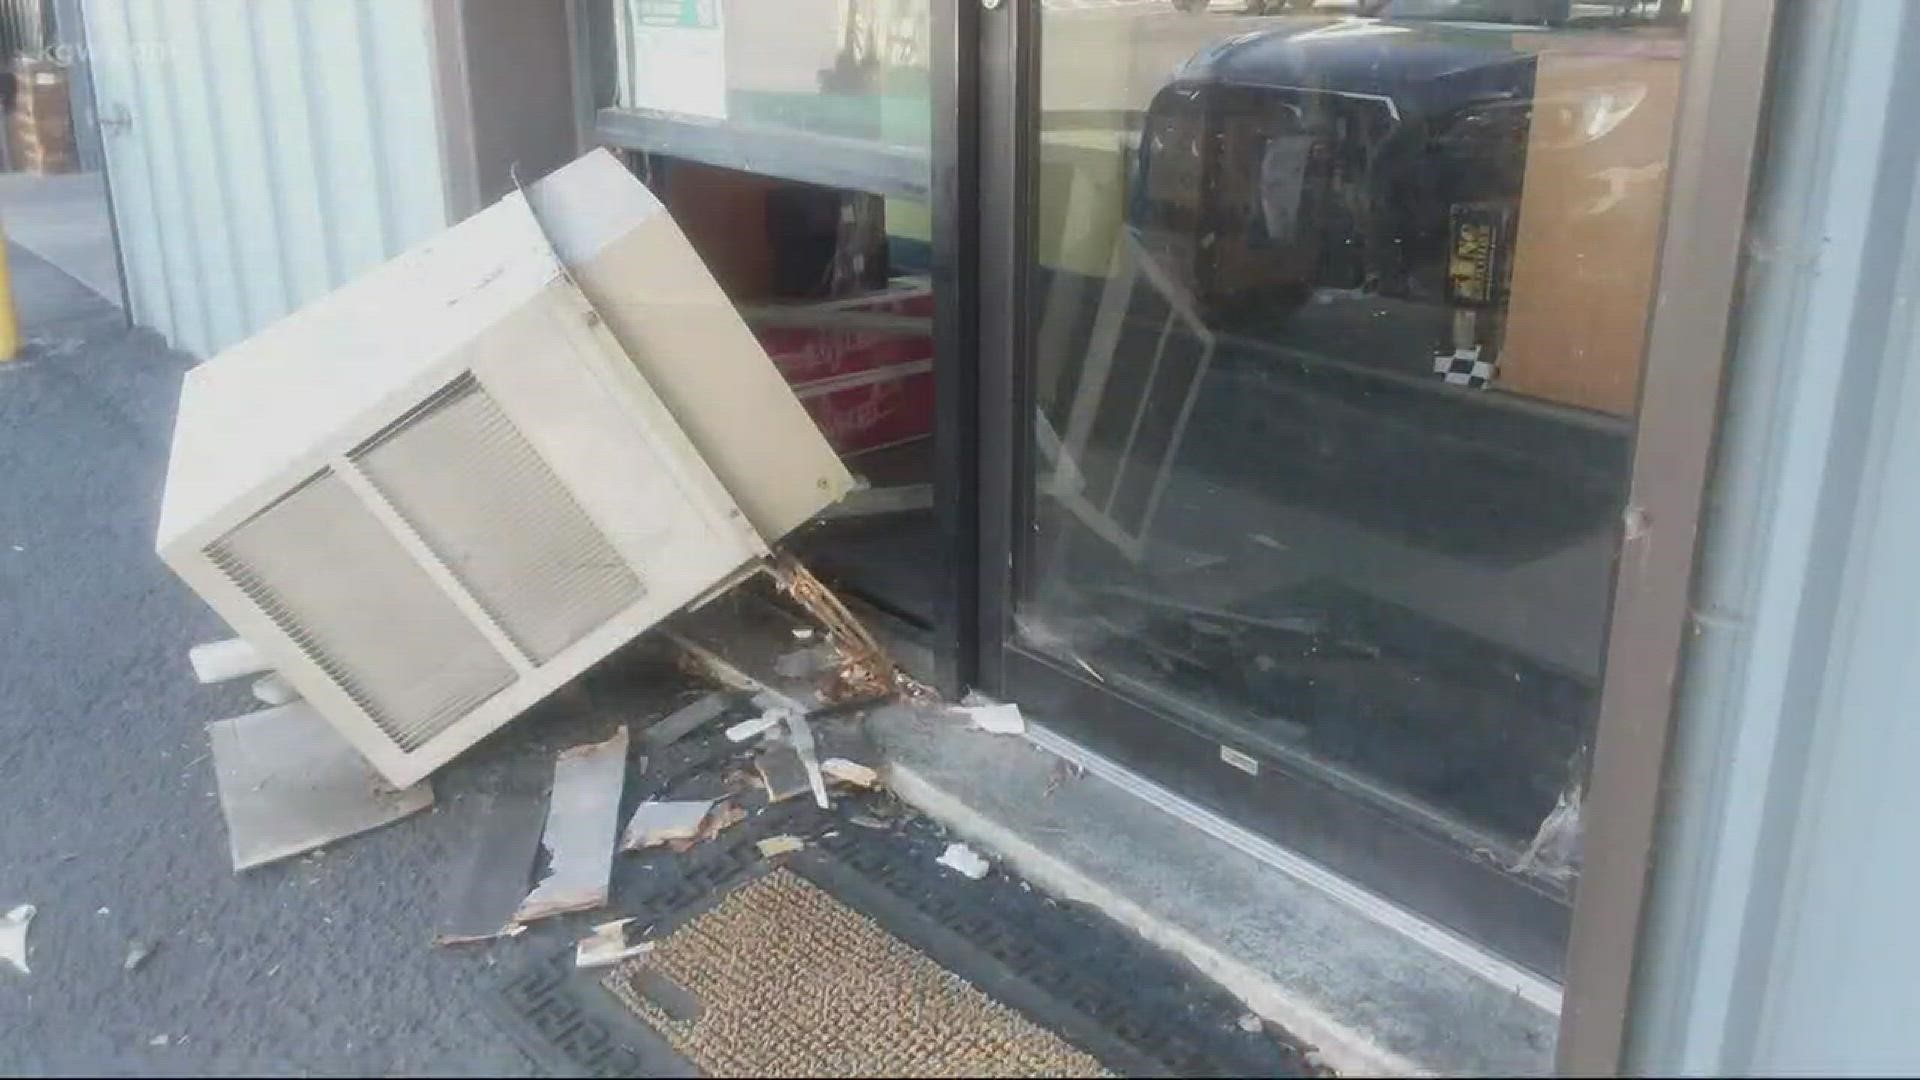 Crooks break into a Tigard business through an air conditioning unit.